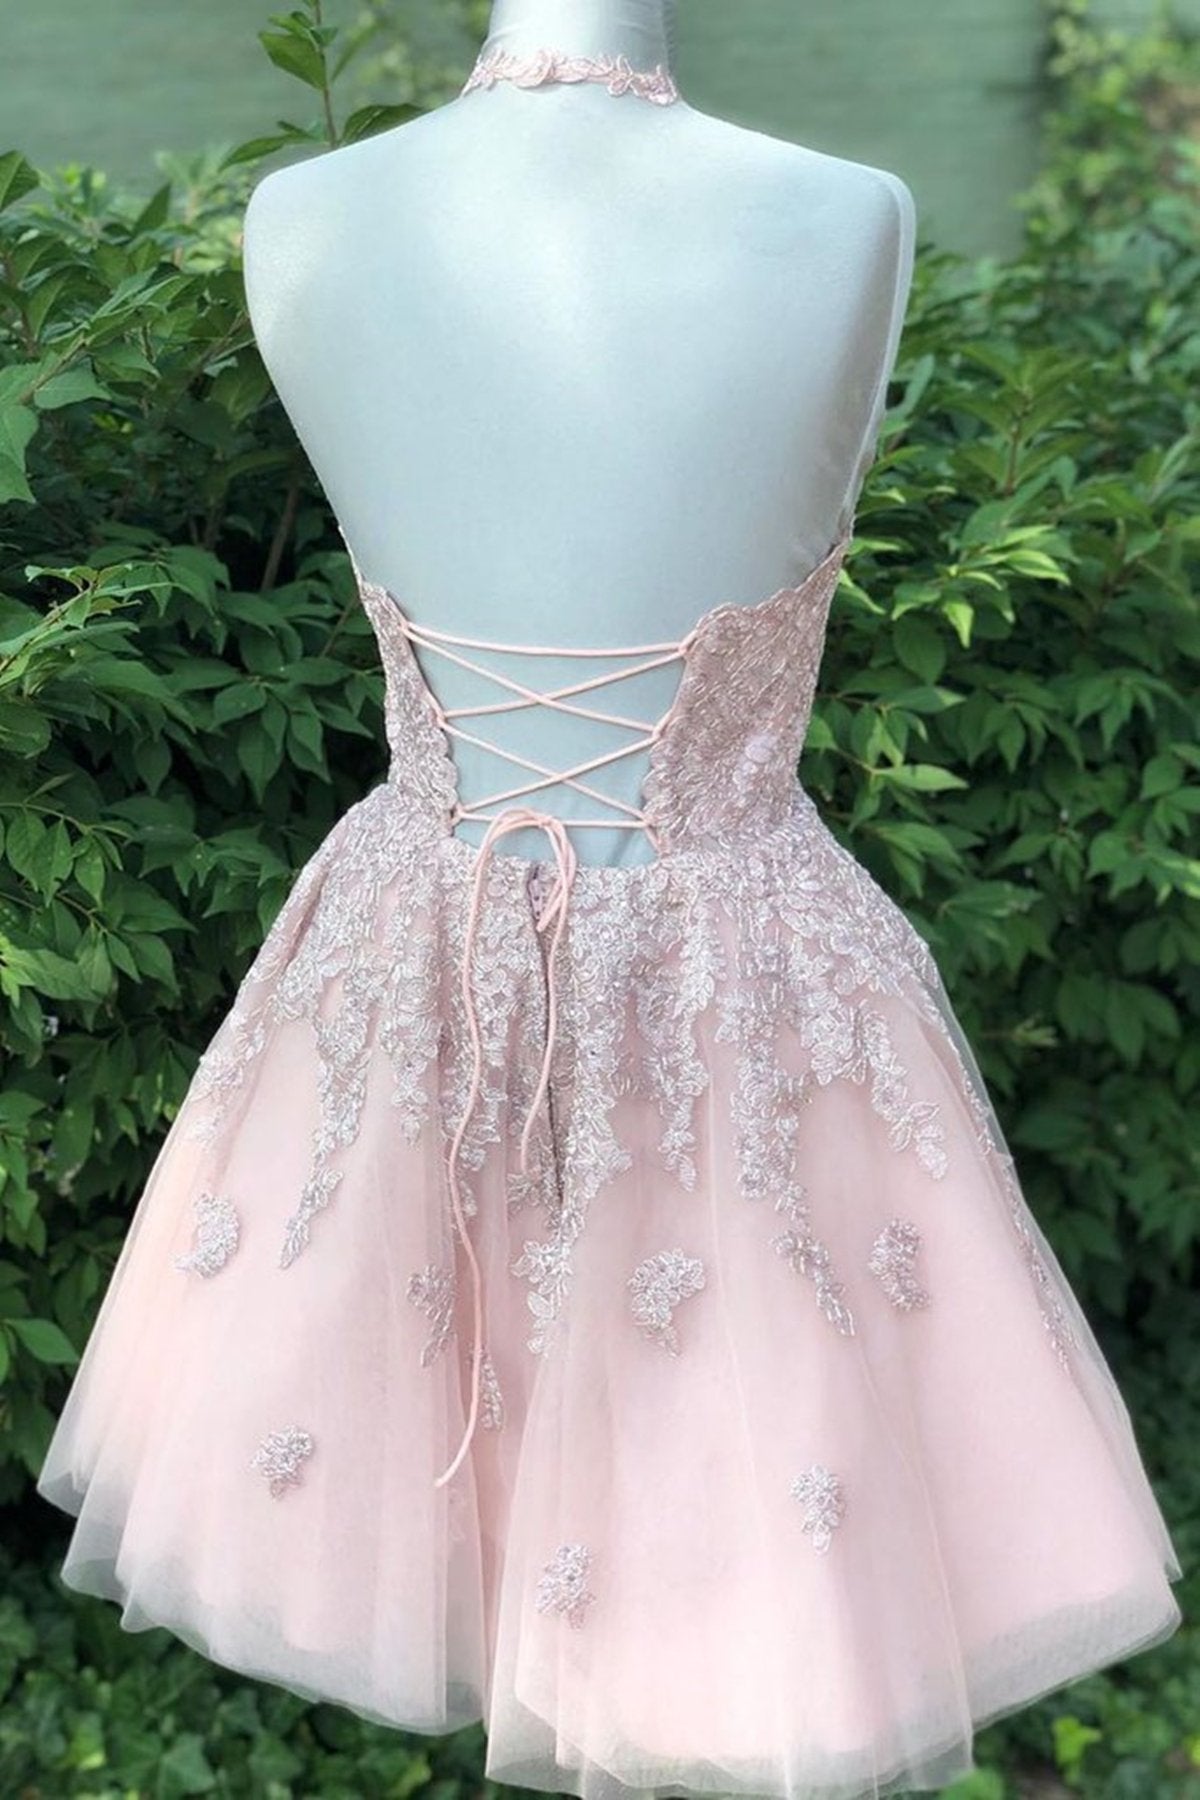 Prom Dresses Laced, Short Halter Neck Pink Lace Prom Dresses, Halter Neck Short Pink Lace Graduation Homecoming Dresses